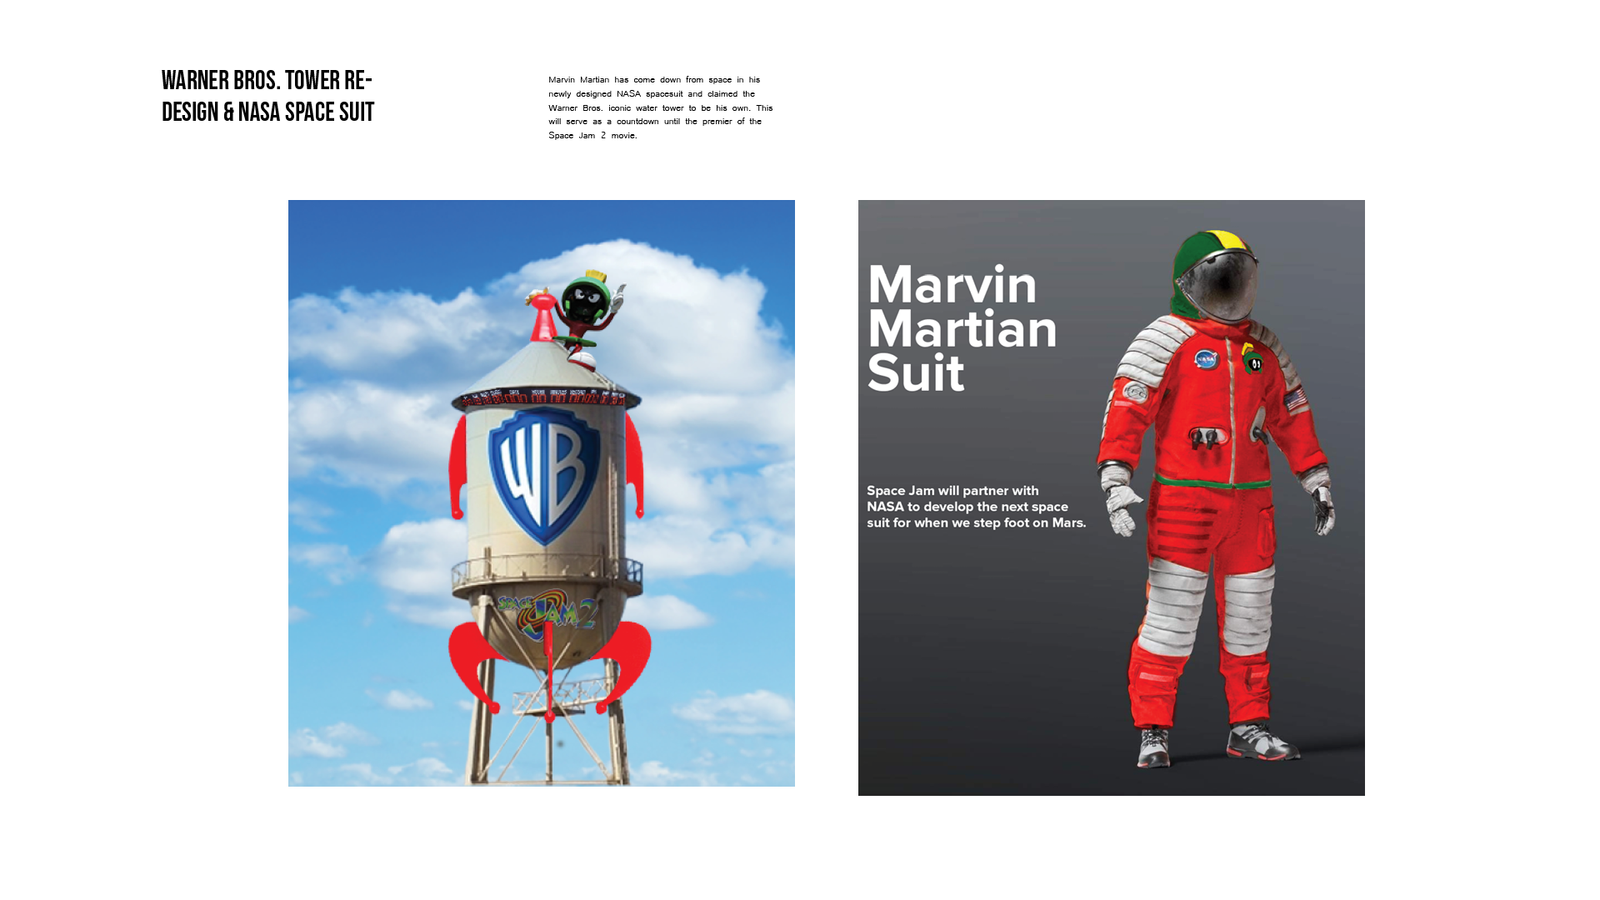 Leading up to the movie release, the Warner Bros. iconic tower will be transformed and taken over by Marvin the Martian. Further PR, NASA will release a 